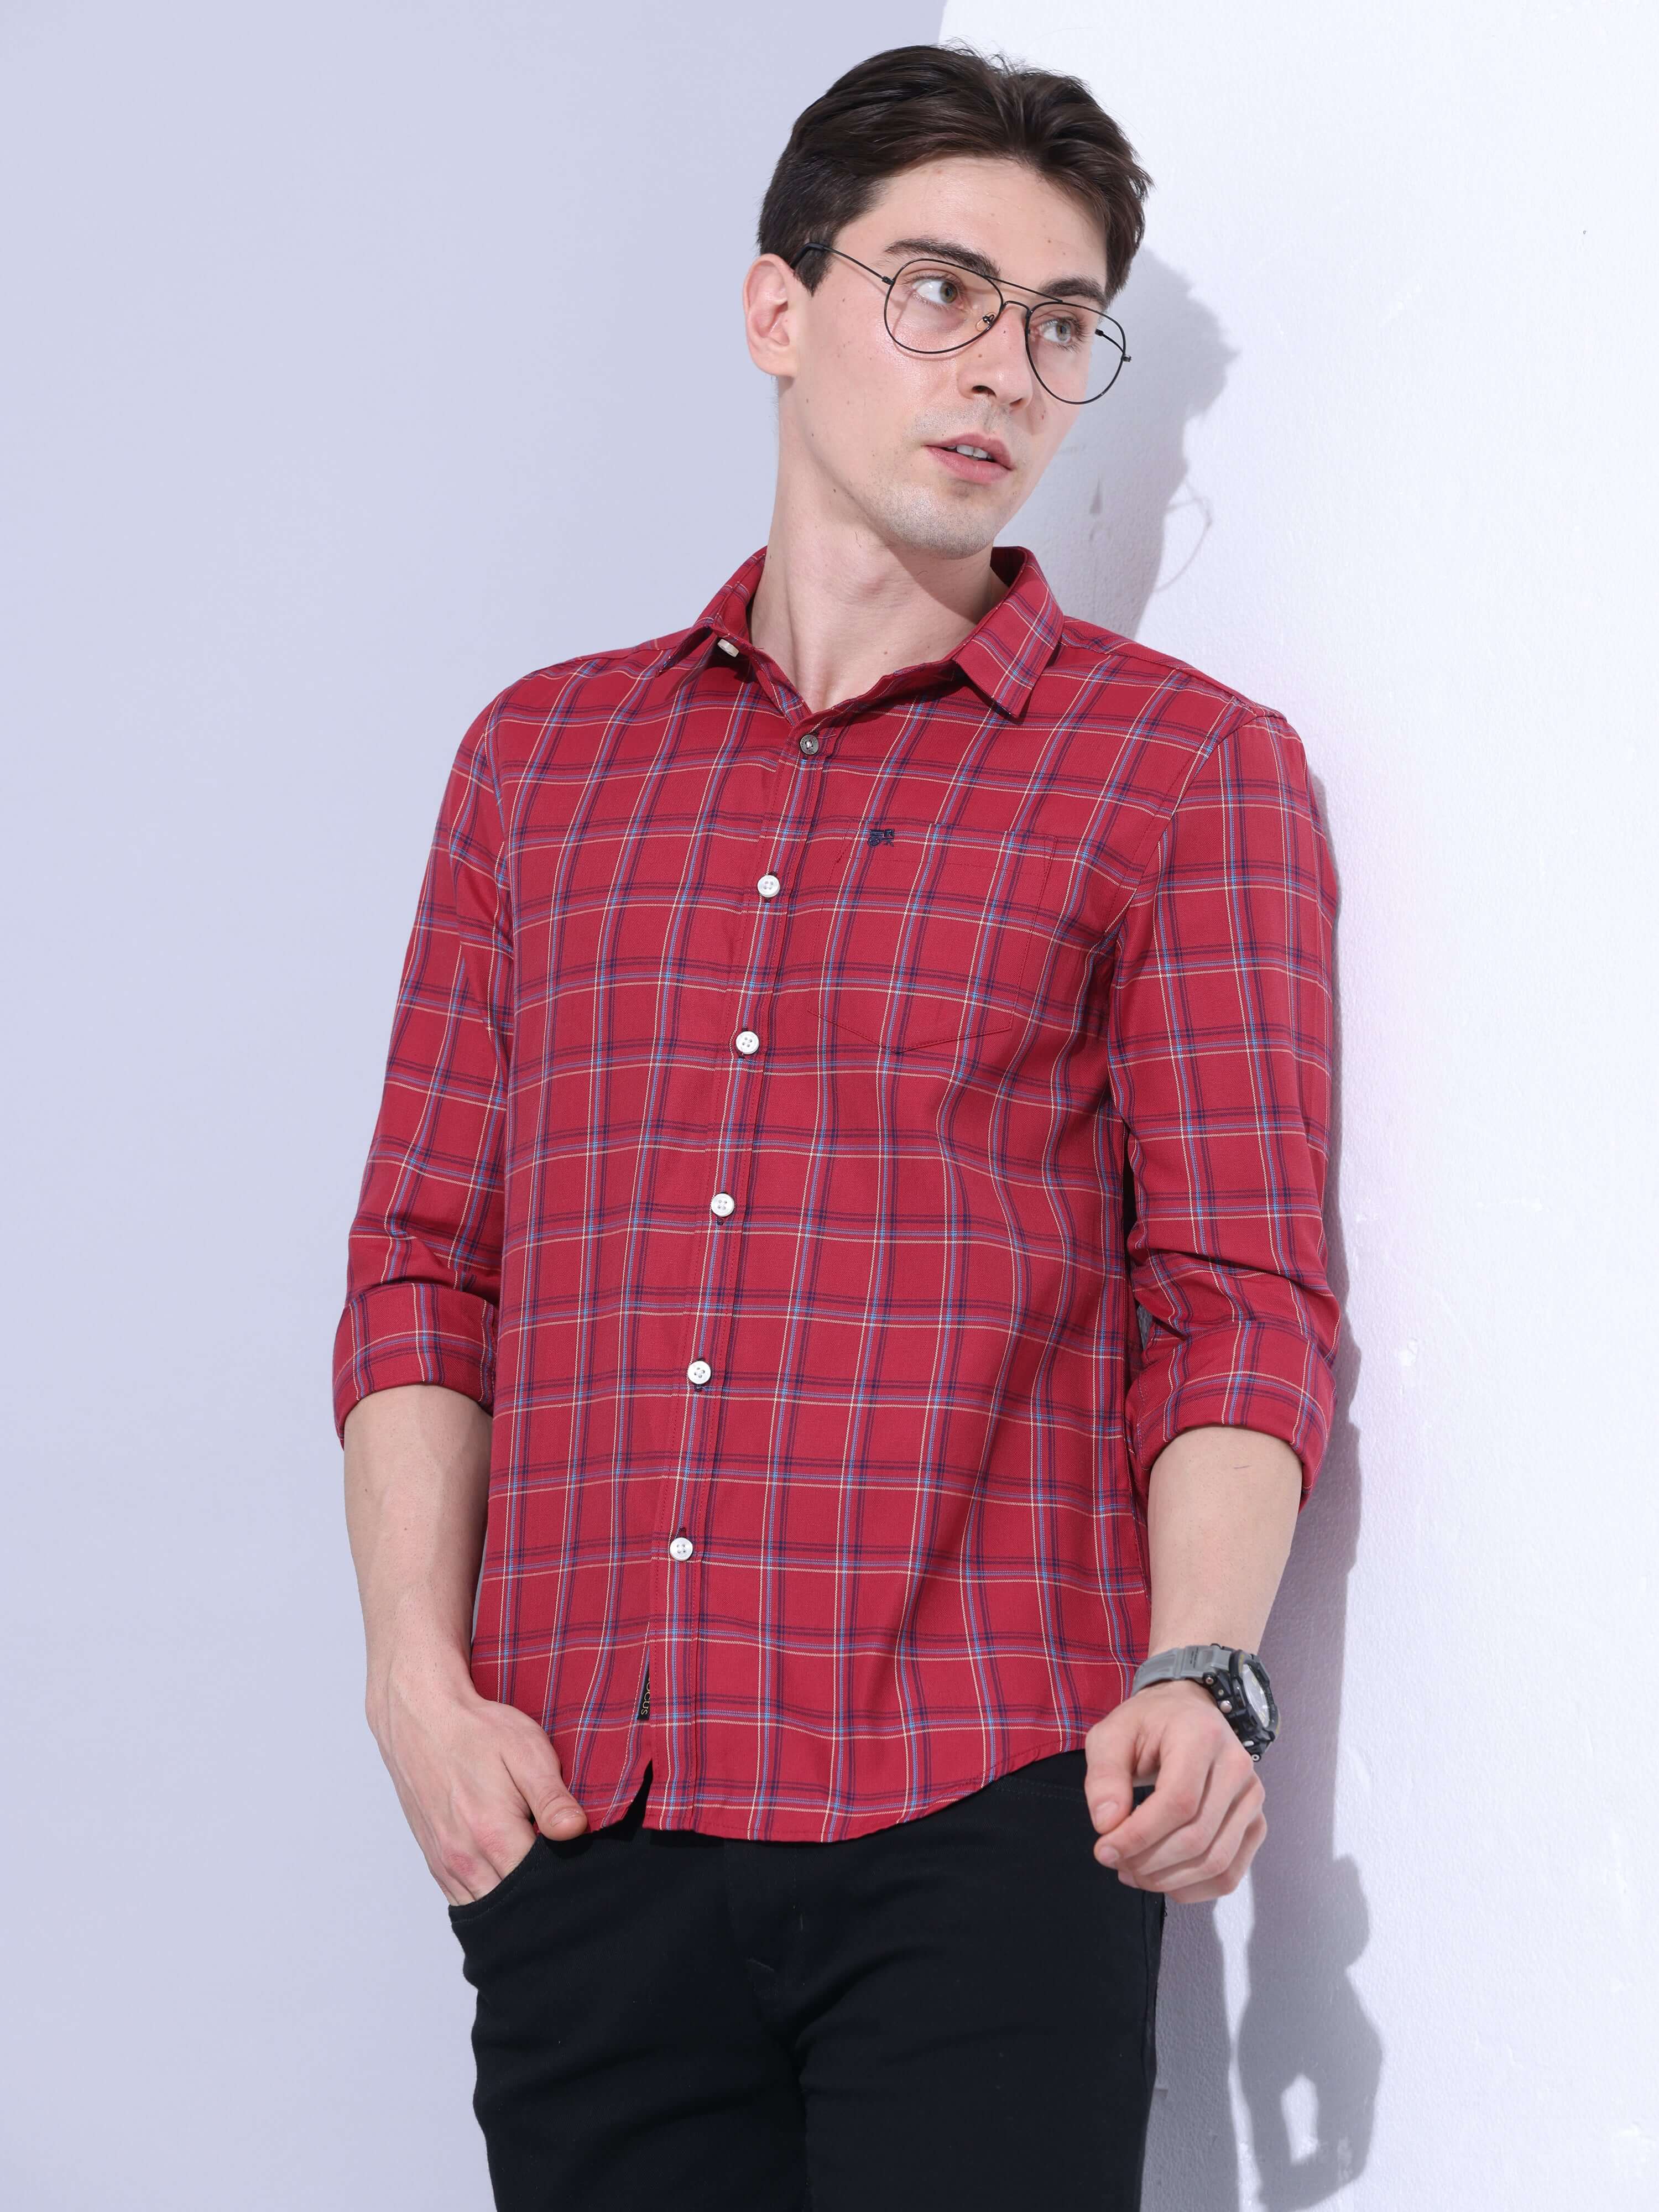 Red Checks Casual Shirt shop online at Estilocus. • Full-sleeve check shirt • Cut and sew placket • Regular collar • Double button square cuff. • Single pocket with logo embroidery • Curved hemline • Finest quality sewing • Machine wash care • Suitable to